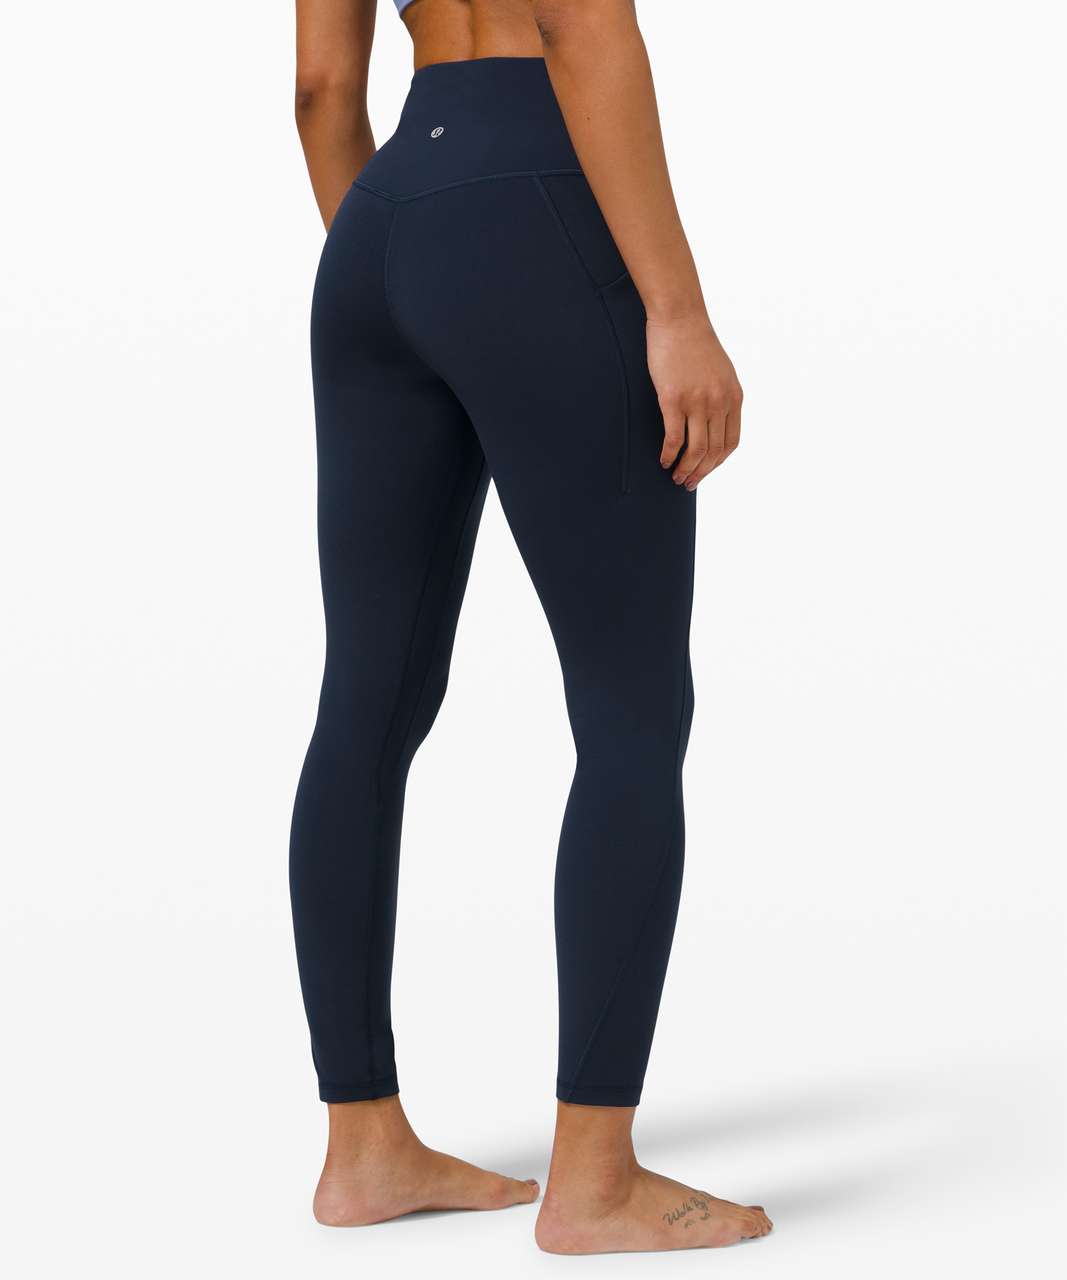 Lululemon Align High Rise Pant with Pockets 25" - True Navy